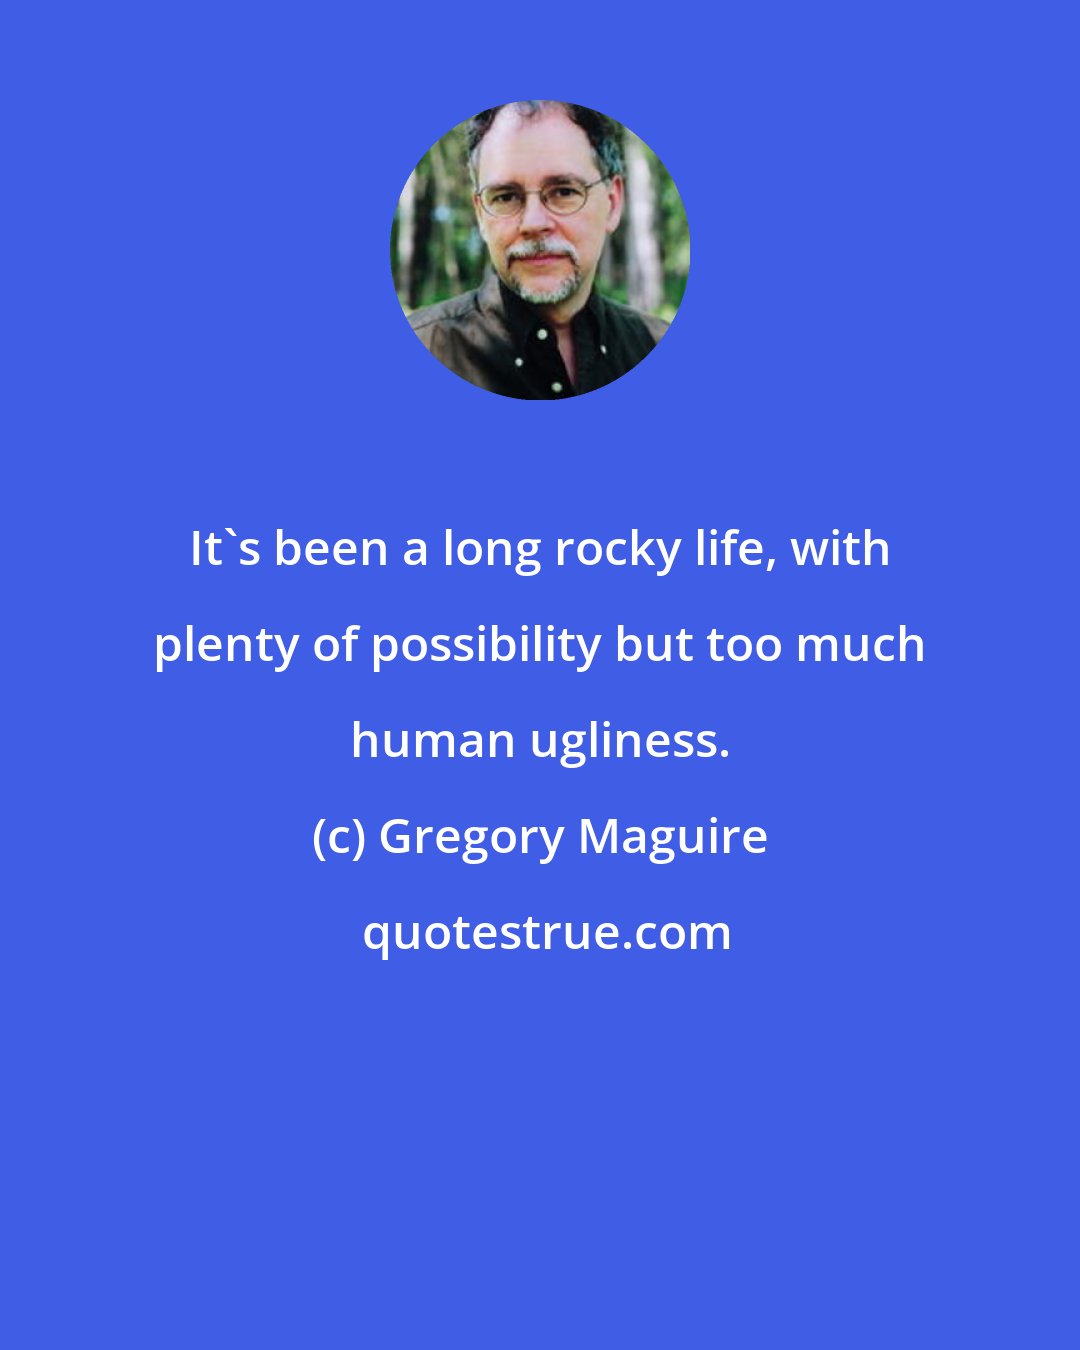 Gregory Maguire: It's been a long rocky life, with plenty of possibility but too much human ugliness.